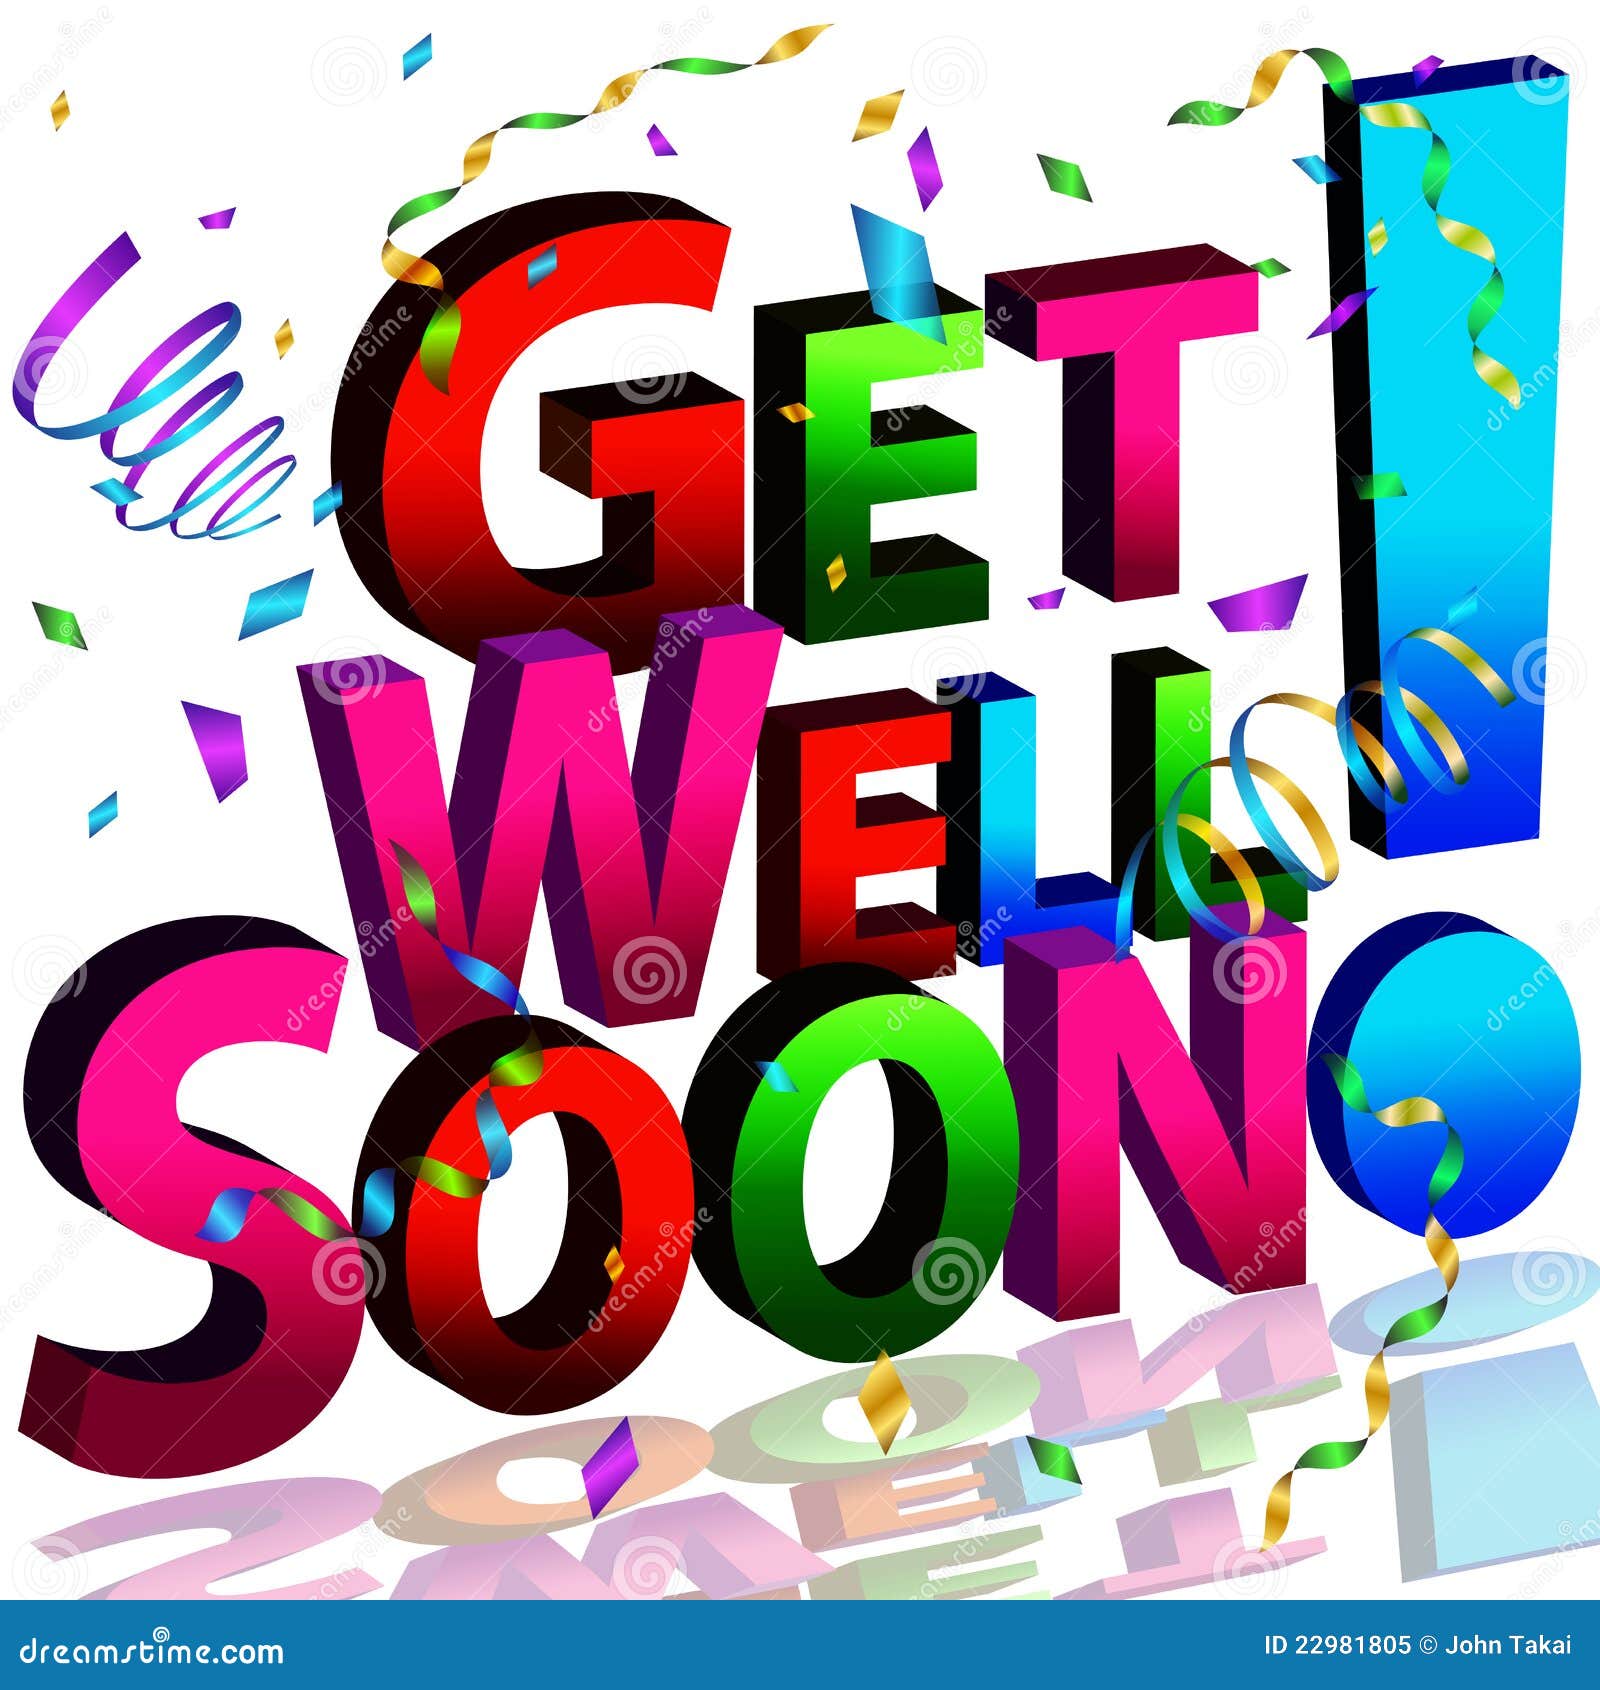 get well soon clipart - photo #42